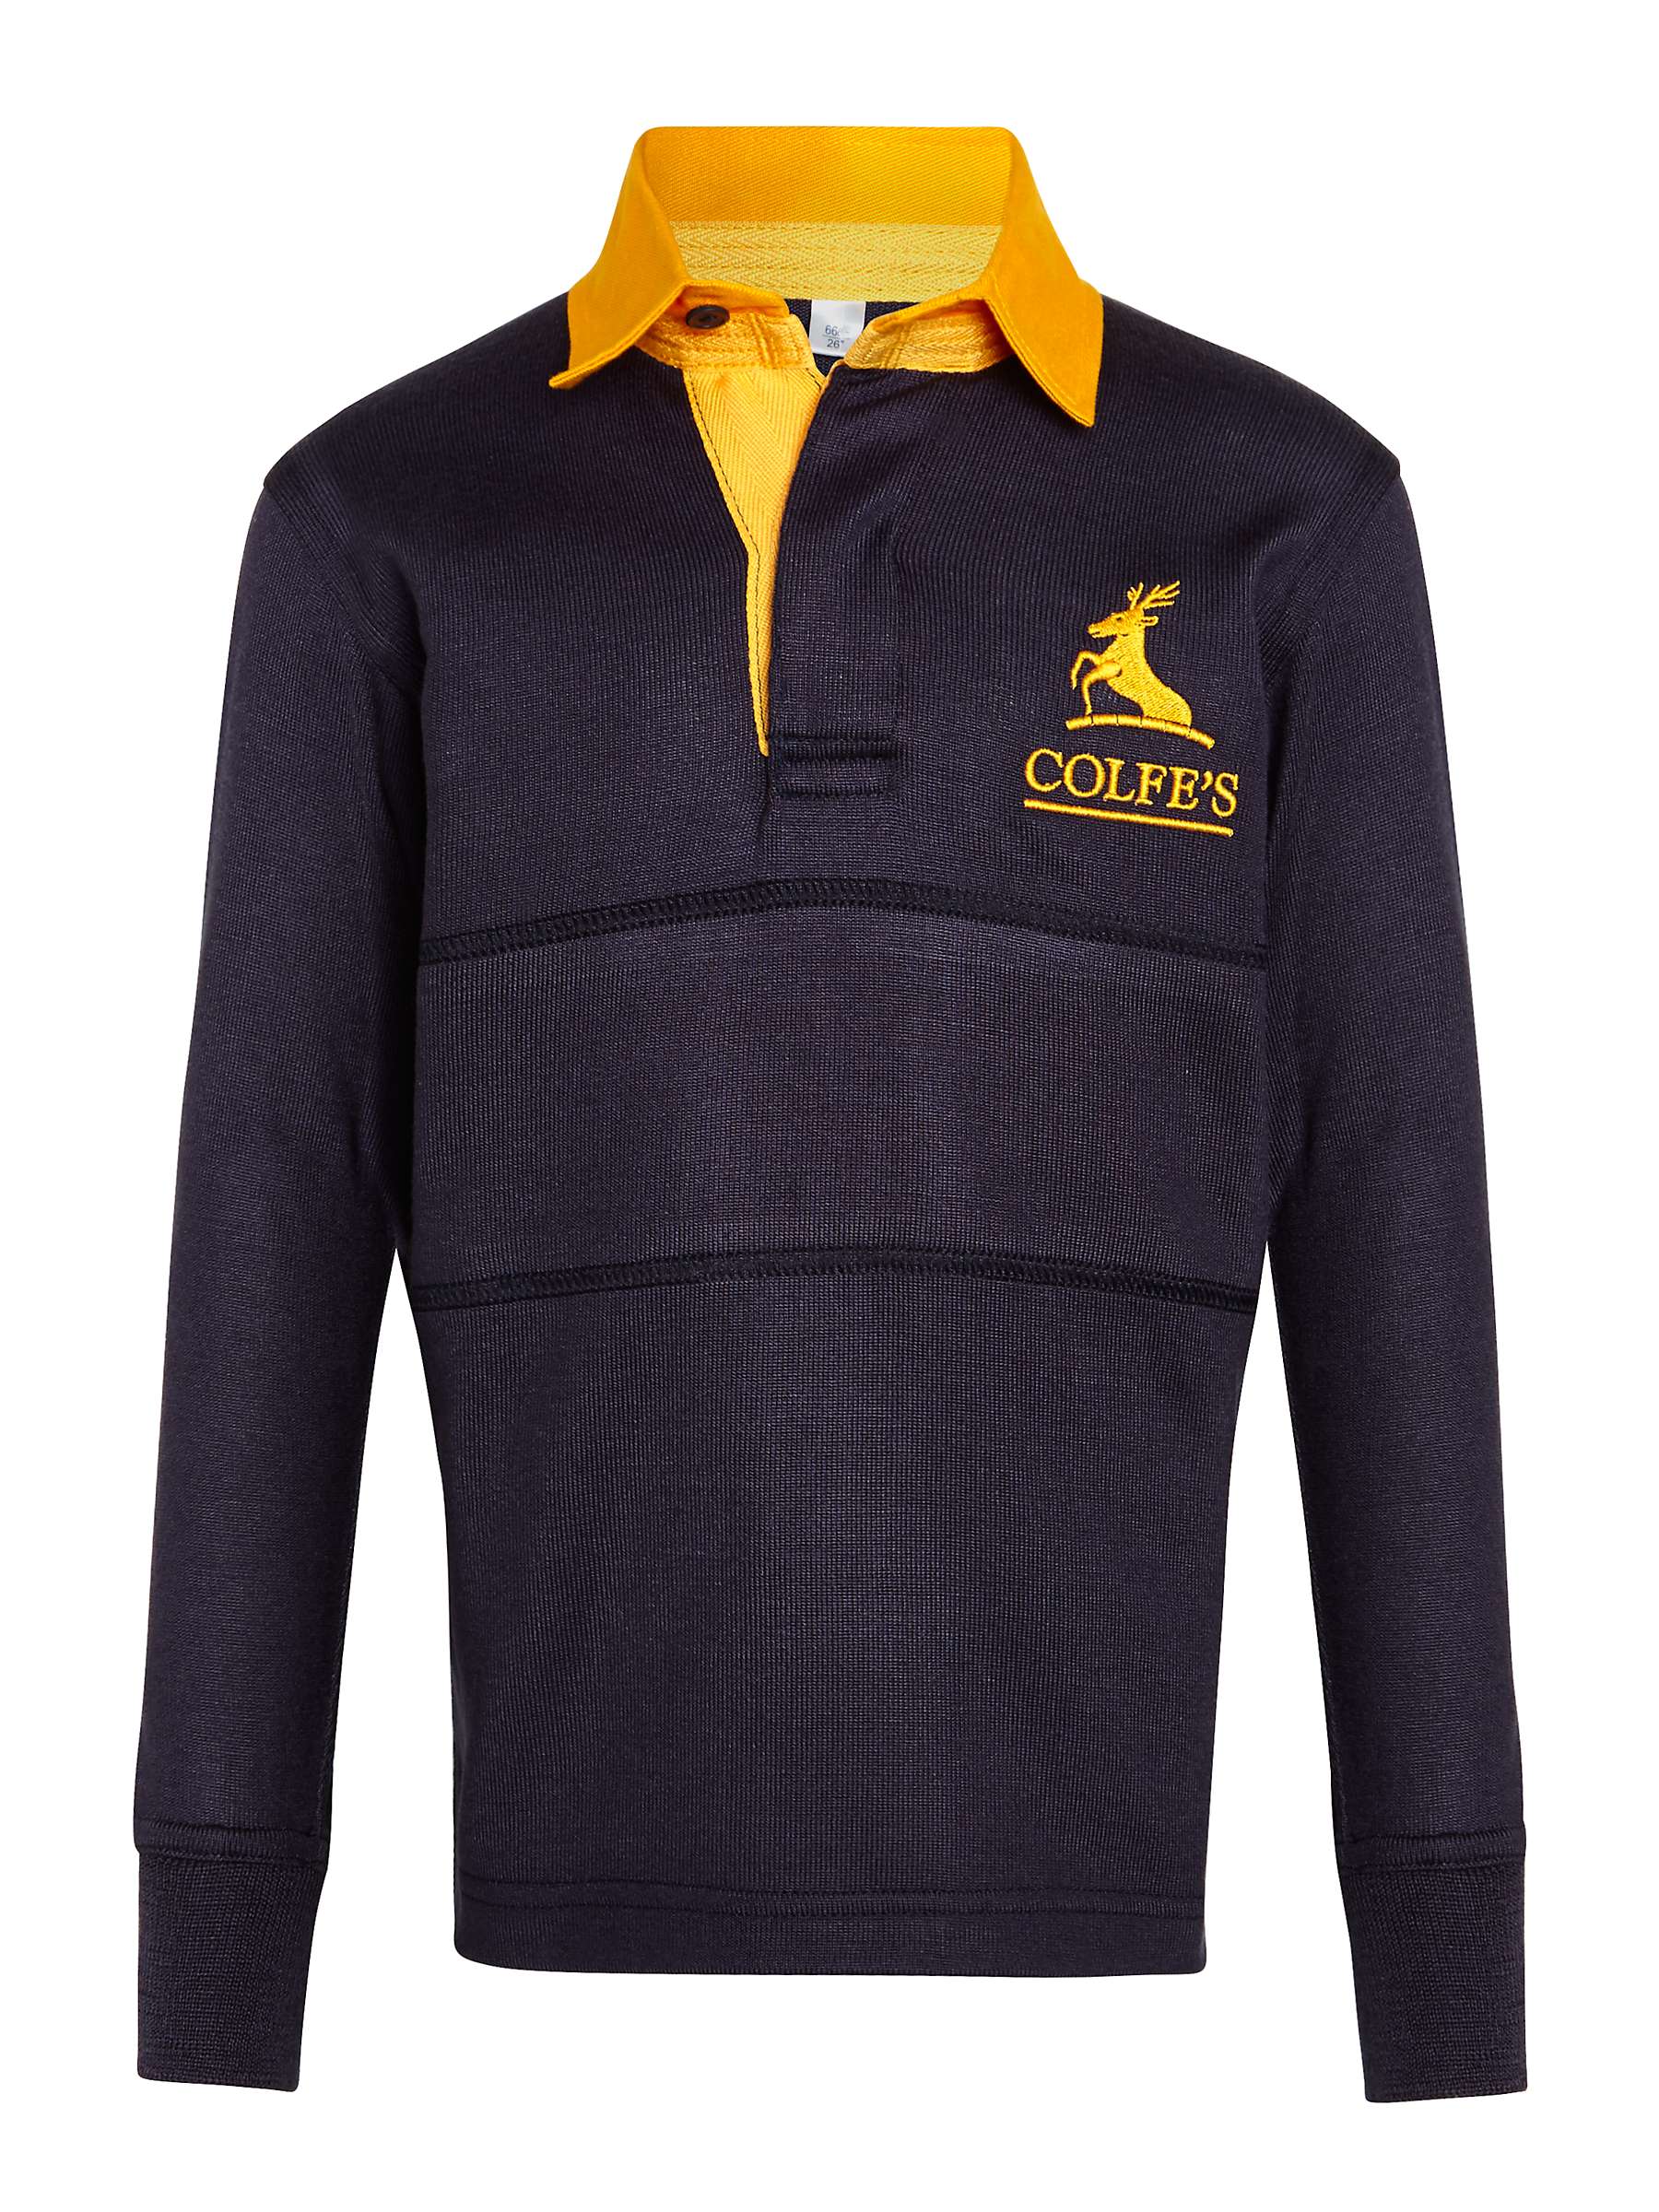 Buy Colfe's School Boys' Rugby Jersey, Navy Blue Online at johnlewis.com